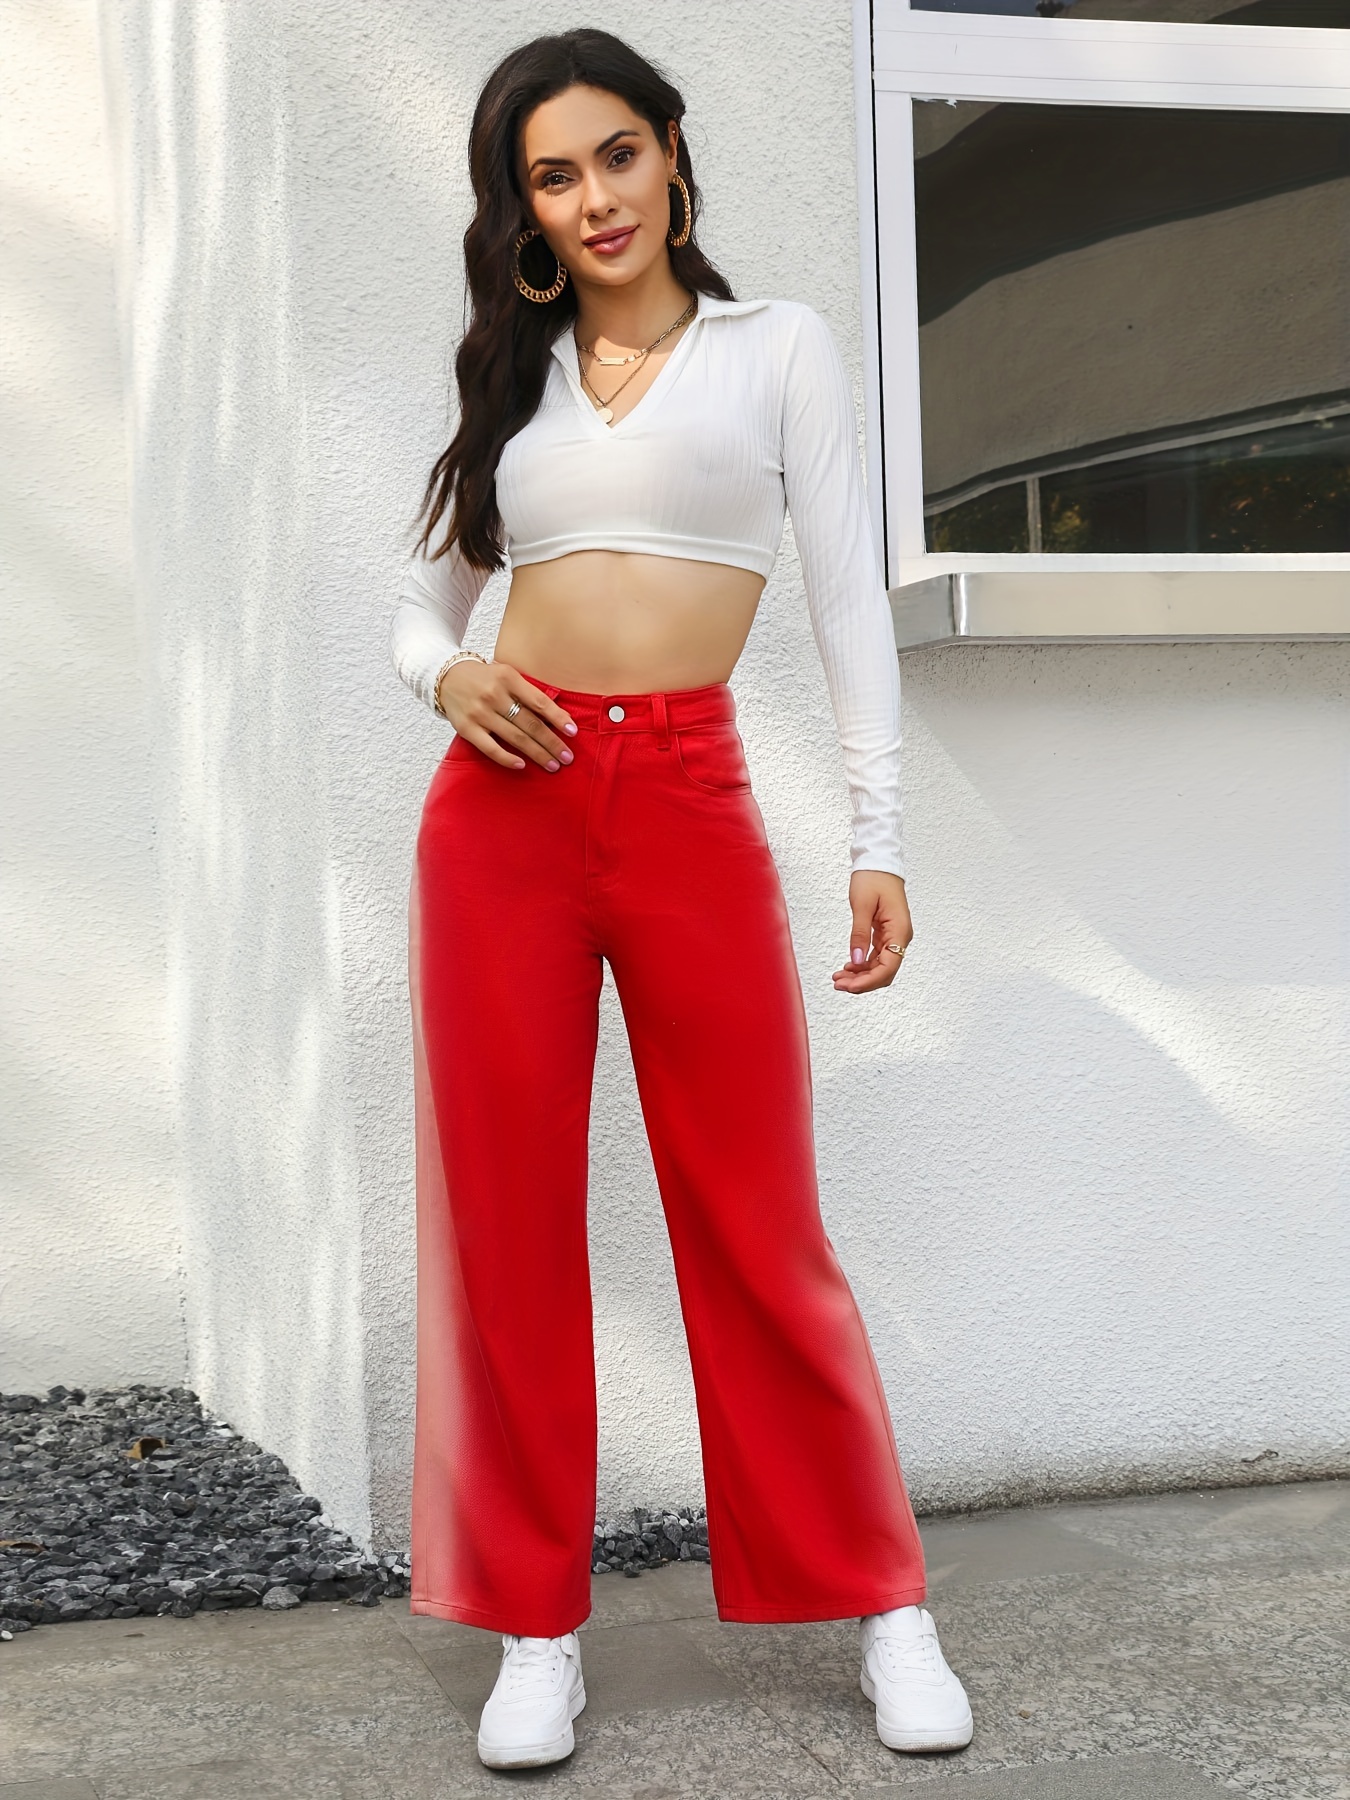 Red Jeans Denim Top  Red jeans outfit, Everyday fashion outfits